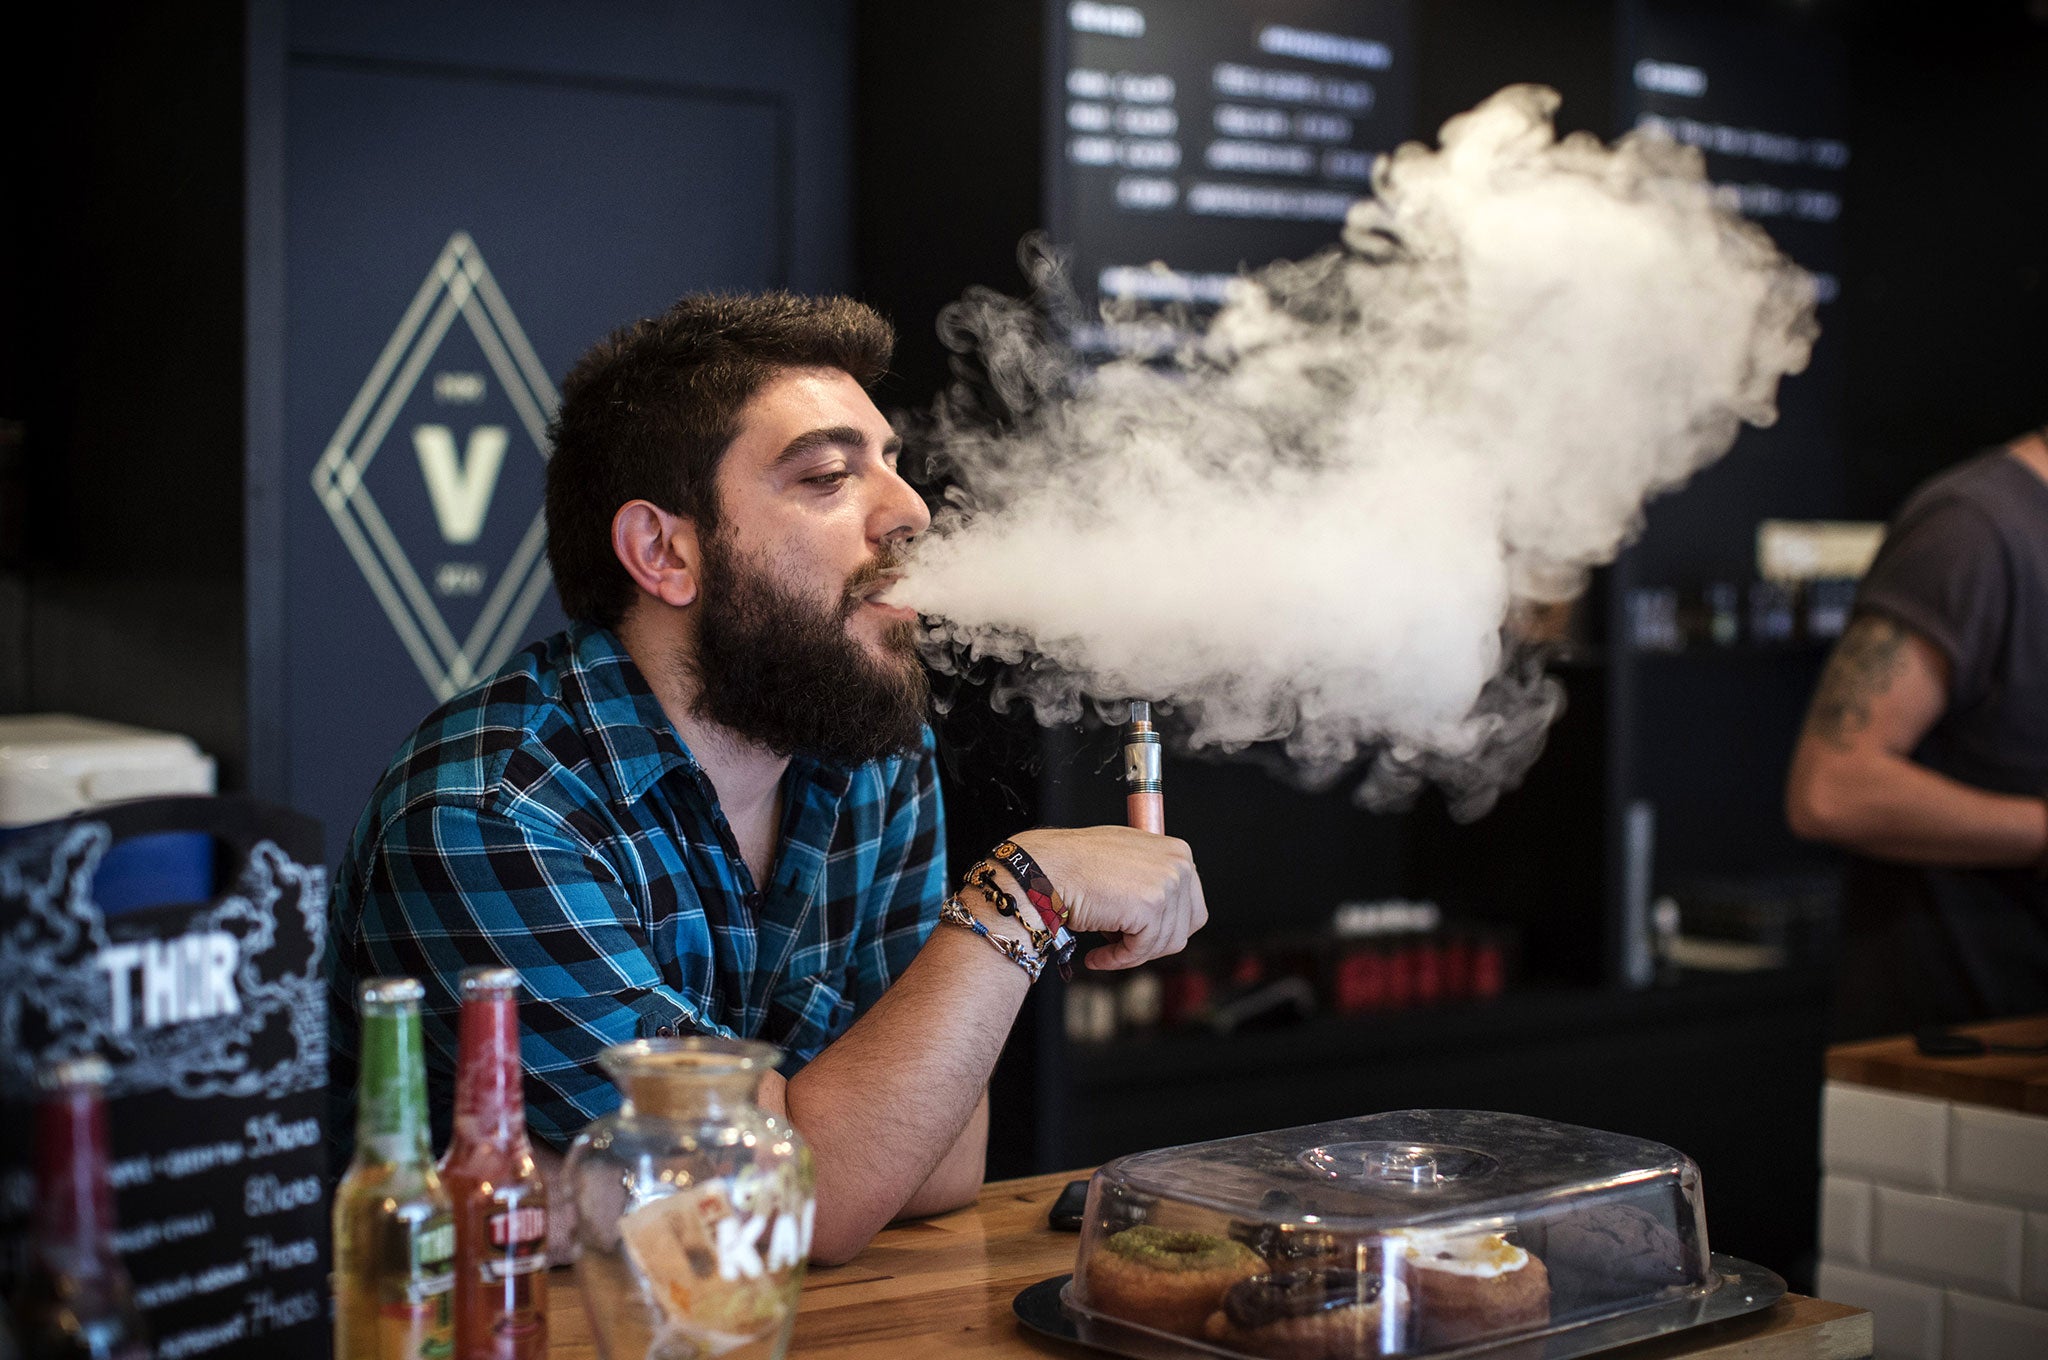 Vape Lab employee Leonardo Verzaro uses an E-Cigarette while working in London. The Department of Health have ruled out the outlawing of 'e-cigs' in enclosed spaces in England, despite calls by the World Health Organisation to do so. WHO have recommended